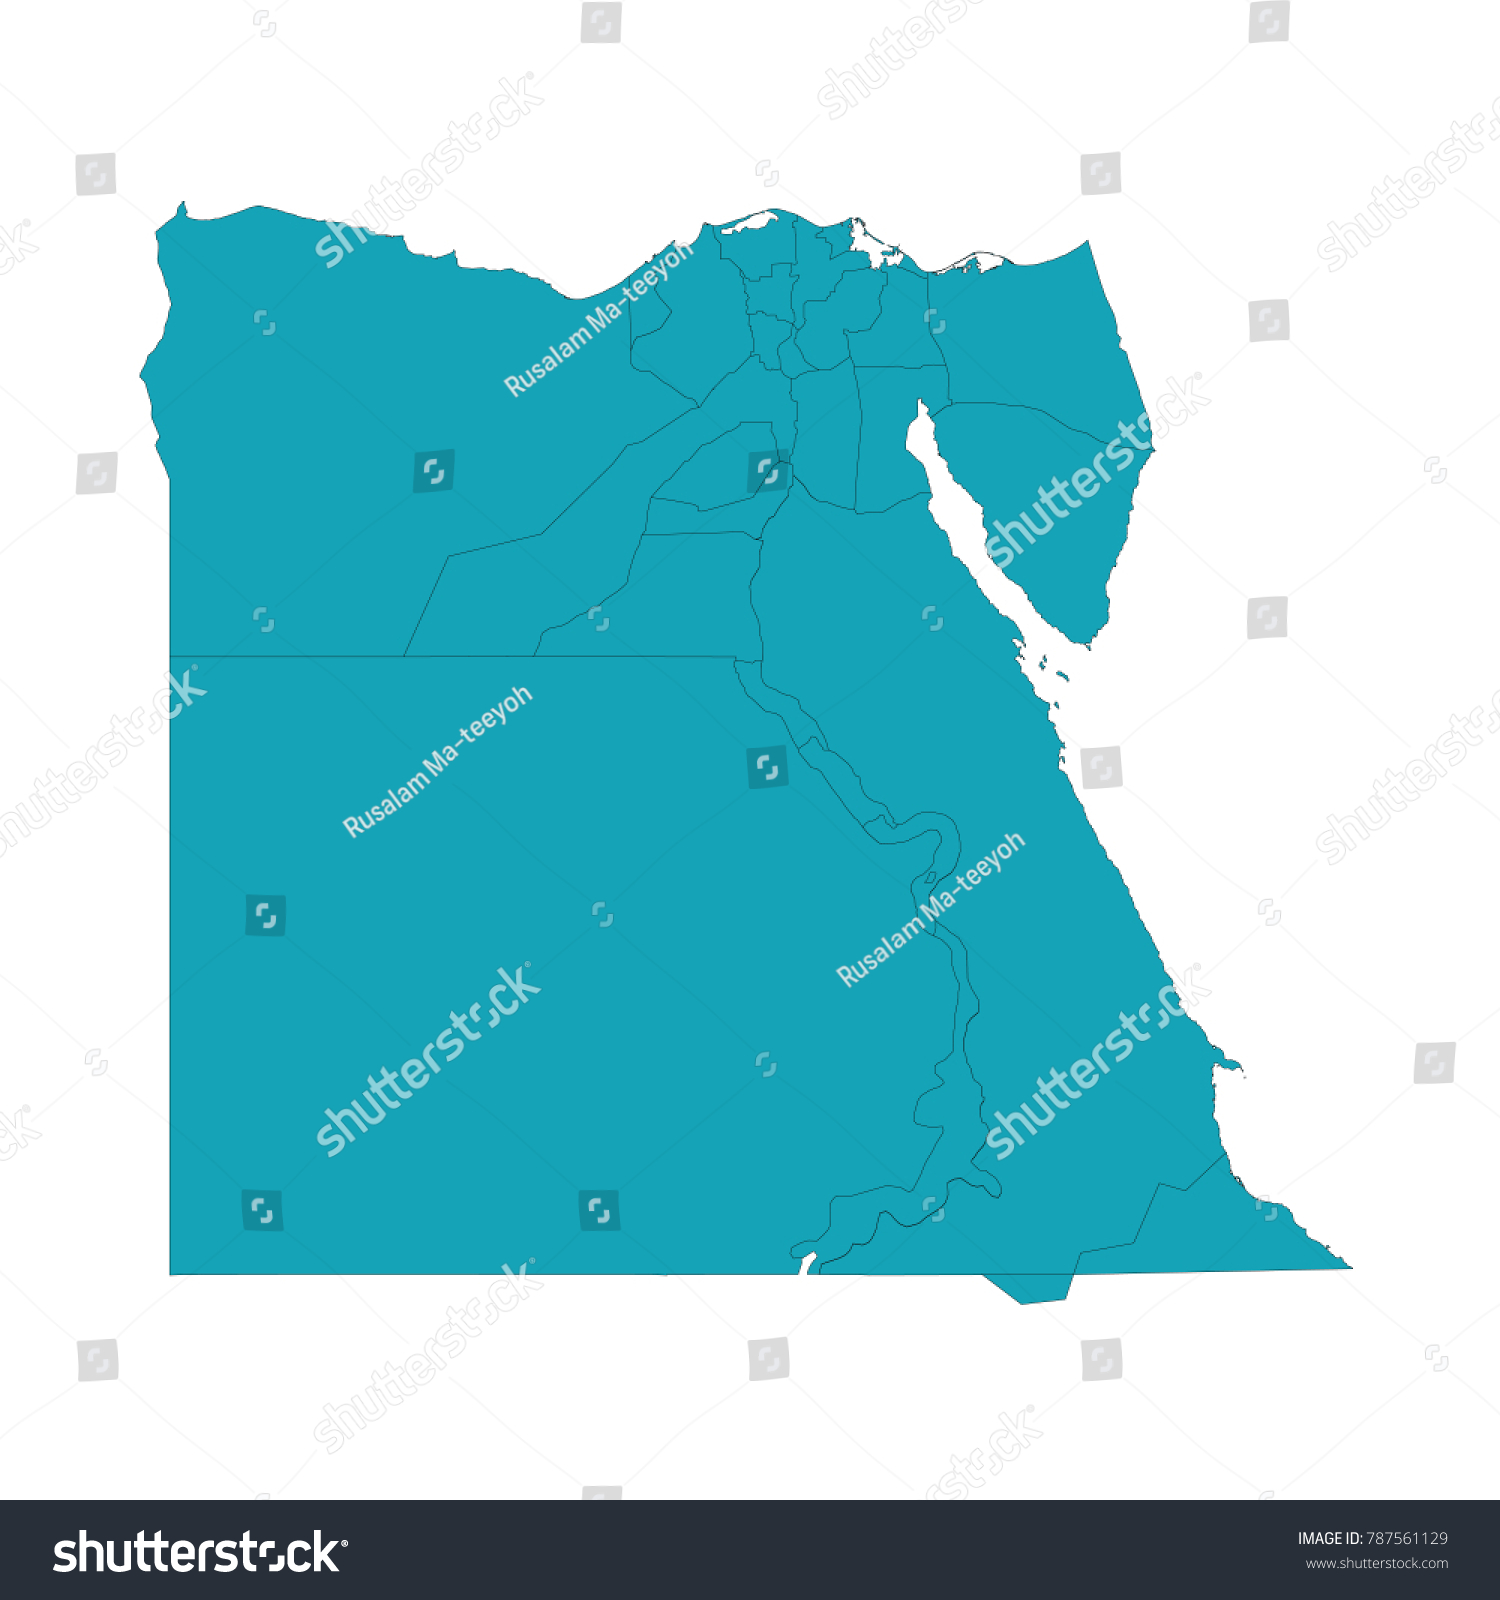 A Map of the country of Egypt, Egypt map - blue geometric rumpled triangular low poly style gradient graphic background. #787561129